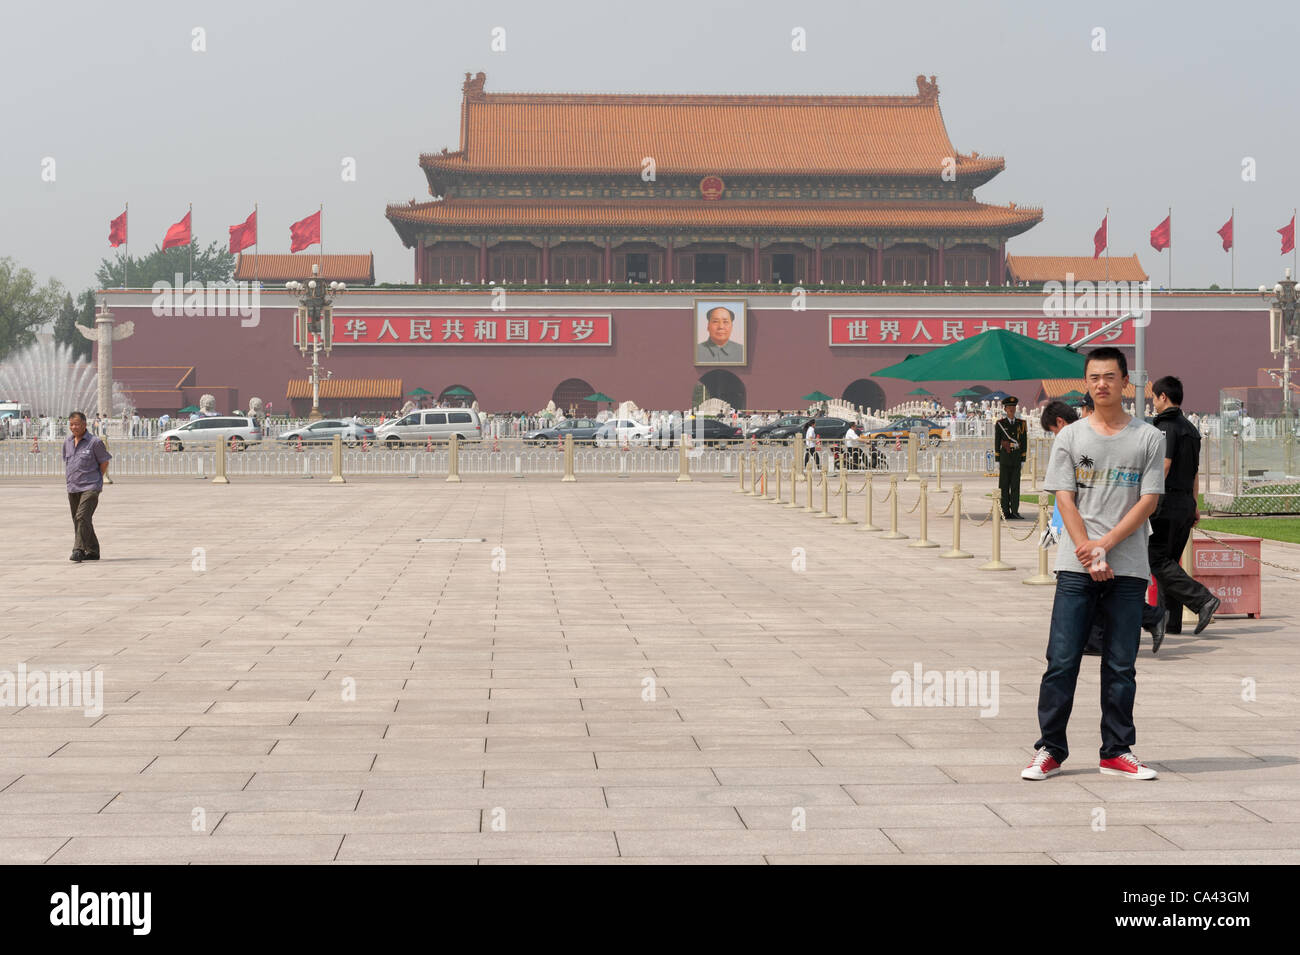 Plainclothes security official (right) on guard at Tiananmen Square, Beijing, China on Monday June 4, 2012. Security is tight on Tiananmen square as June 4th 2012 marks the 23rd anniversary of the military crackdown on students protests at Tiananmen Square in 1989. Stock Photo